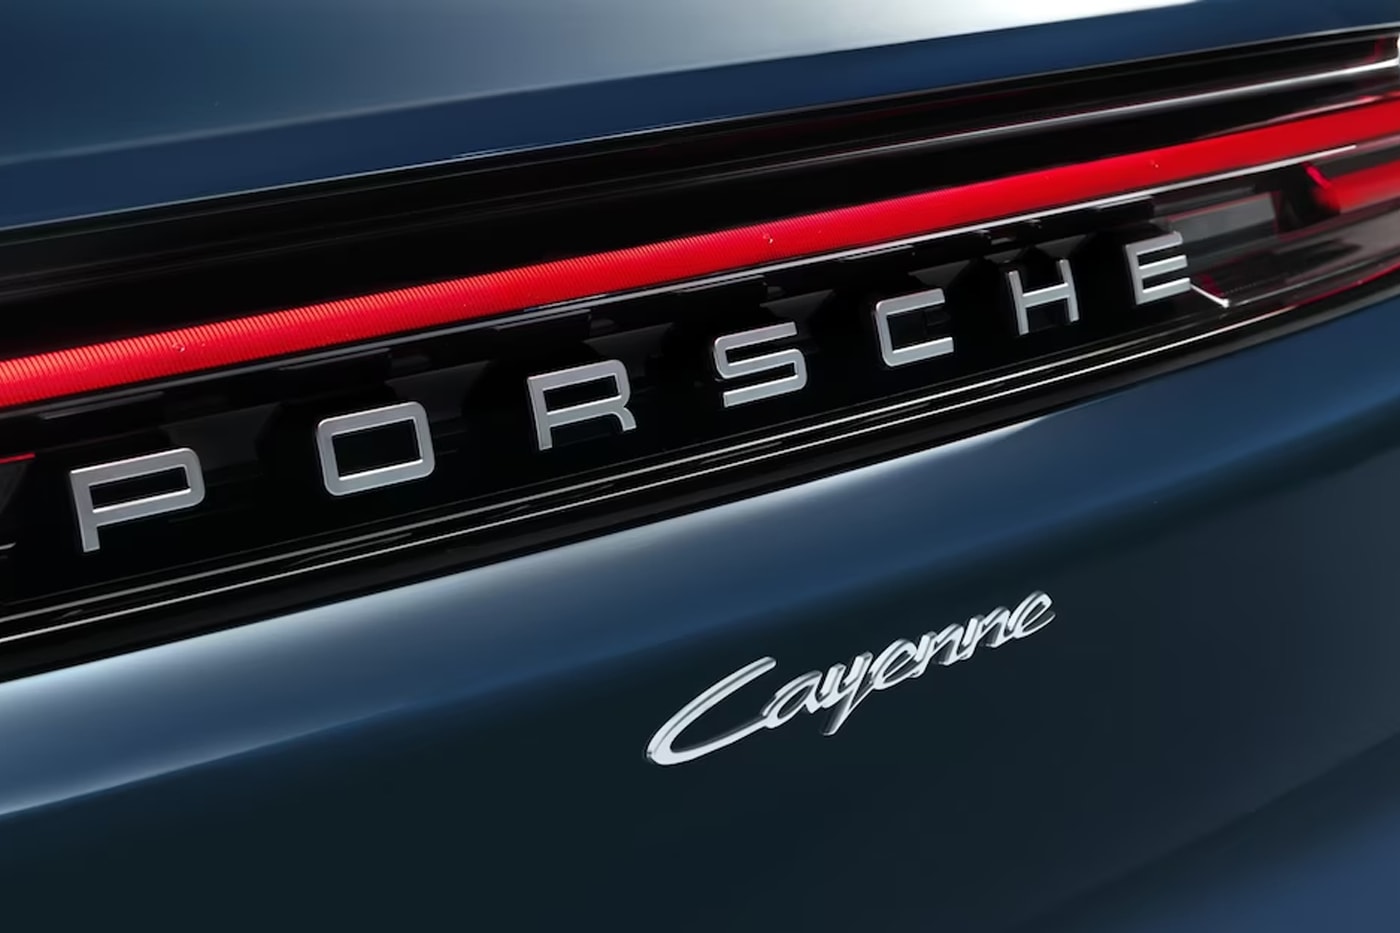 Porsche Cayenne 2024 Luxury SUV Vehicle Car First Look Images Preview Details Specs Design Digital Display Interior Concept Photos Pictures